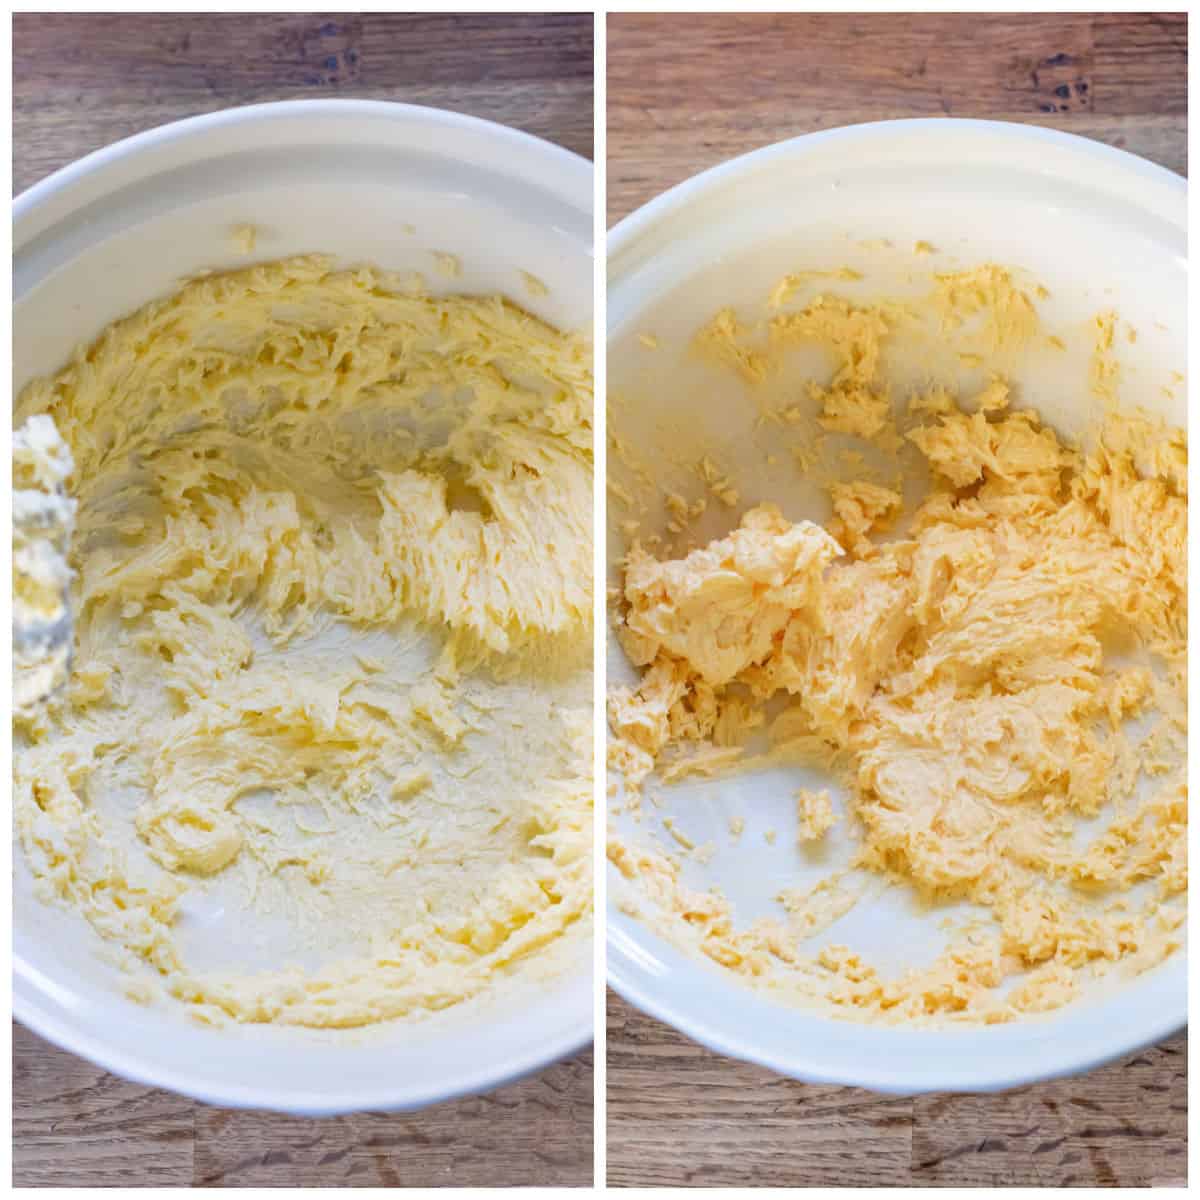 Butter and sugar beaten in a bowl, plus adding eggs.